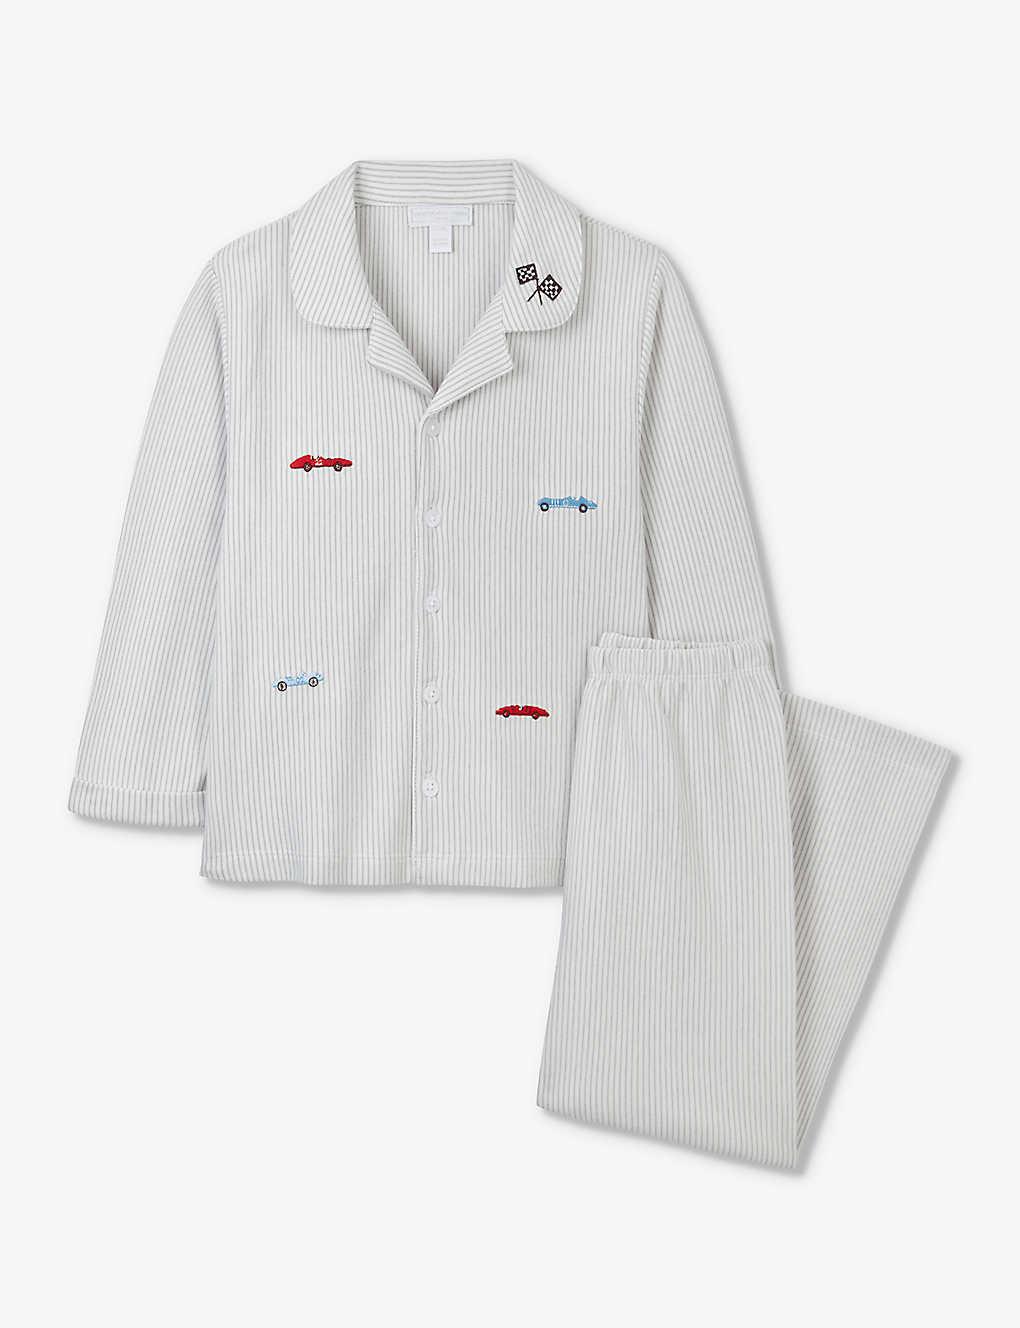 The Little White Company Kids' Race Car-embroidered Cotton Pyjama Set 7-12 Years In White/grey